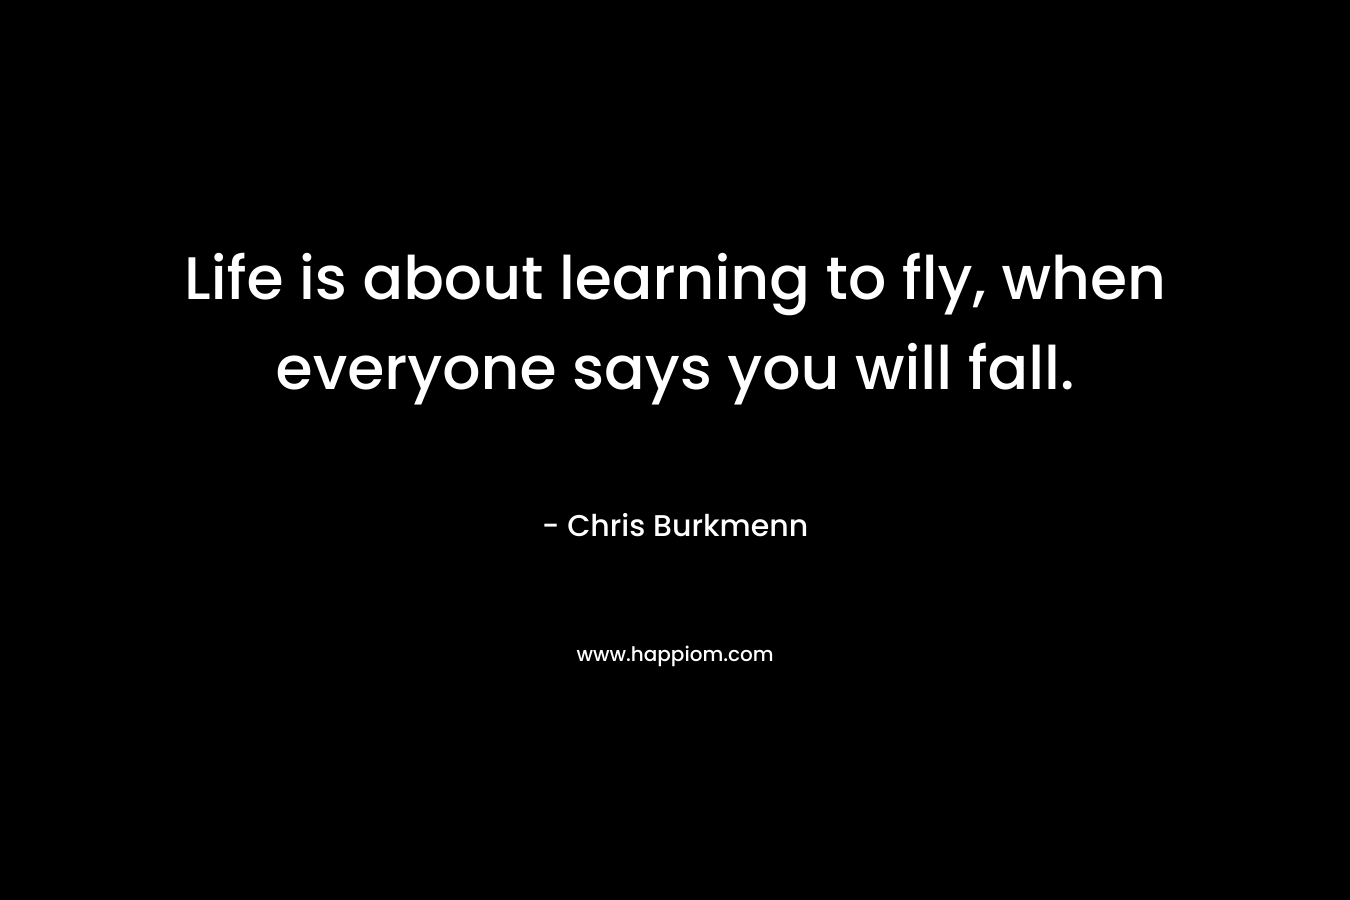 Life is about learning to fly, when everyone says you will fall. – Chris Burkmenn